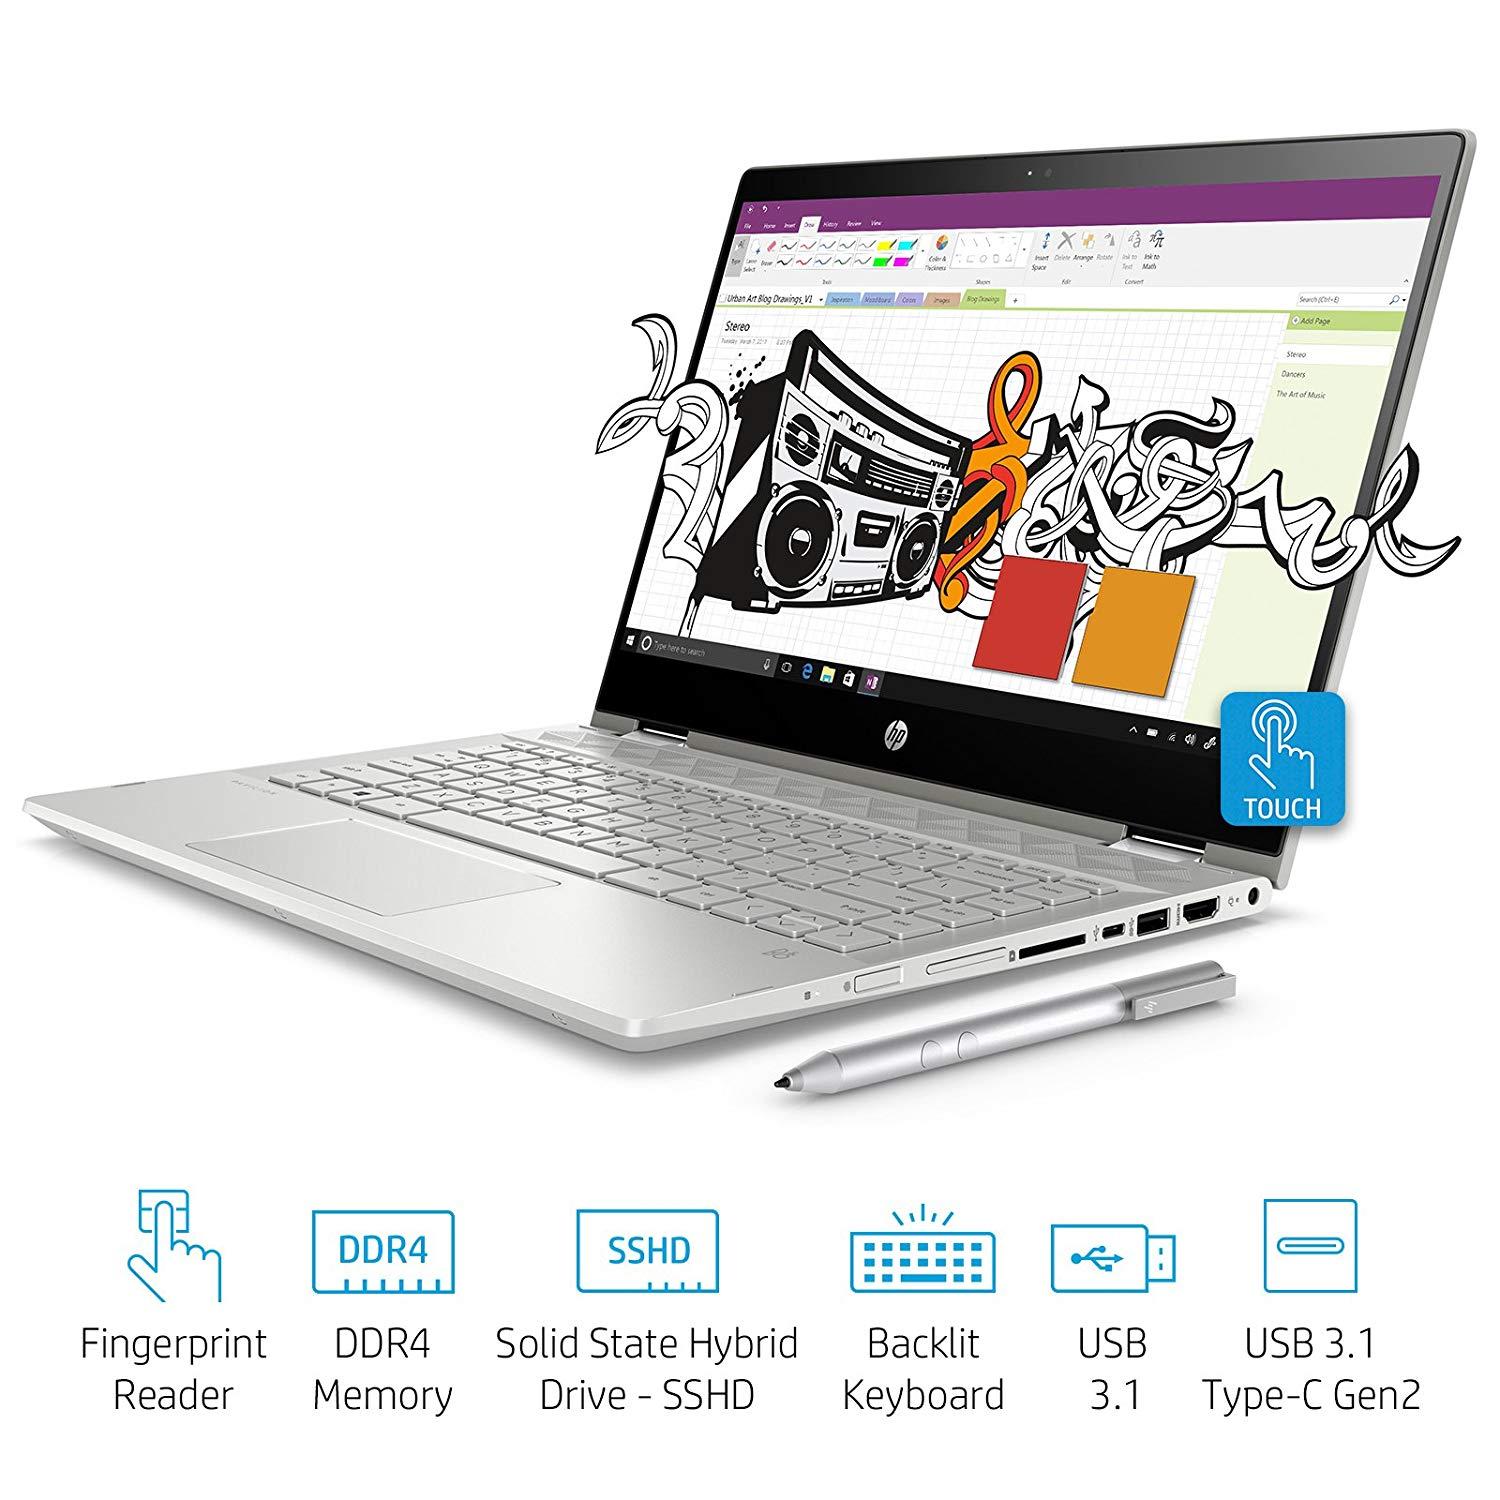 HP launches their new Pavilion x360 Series in India